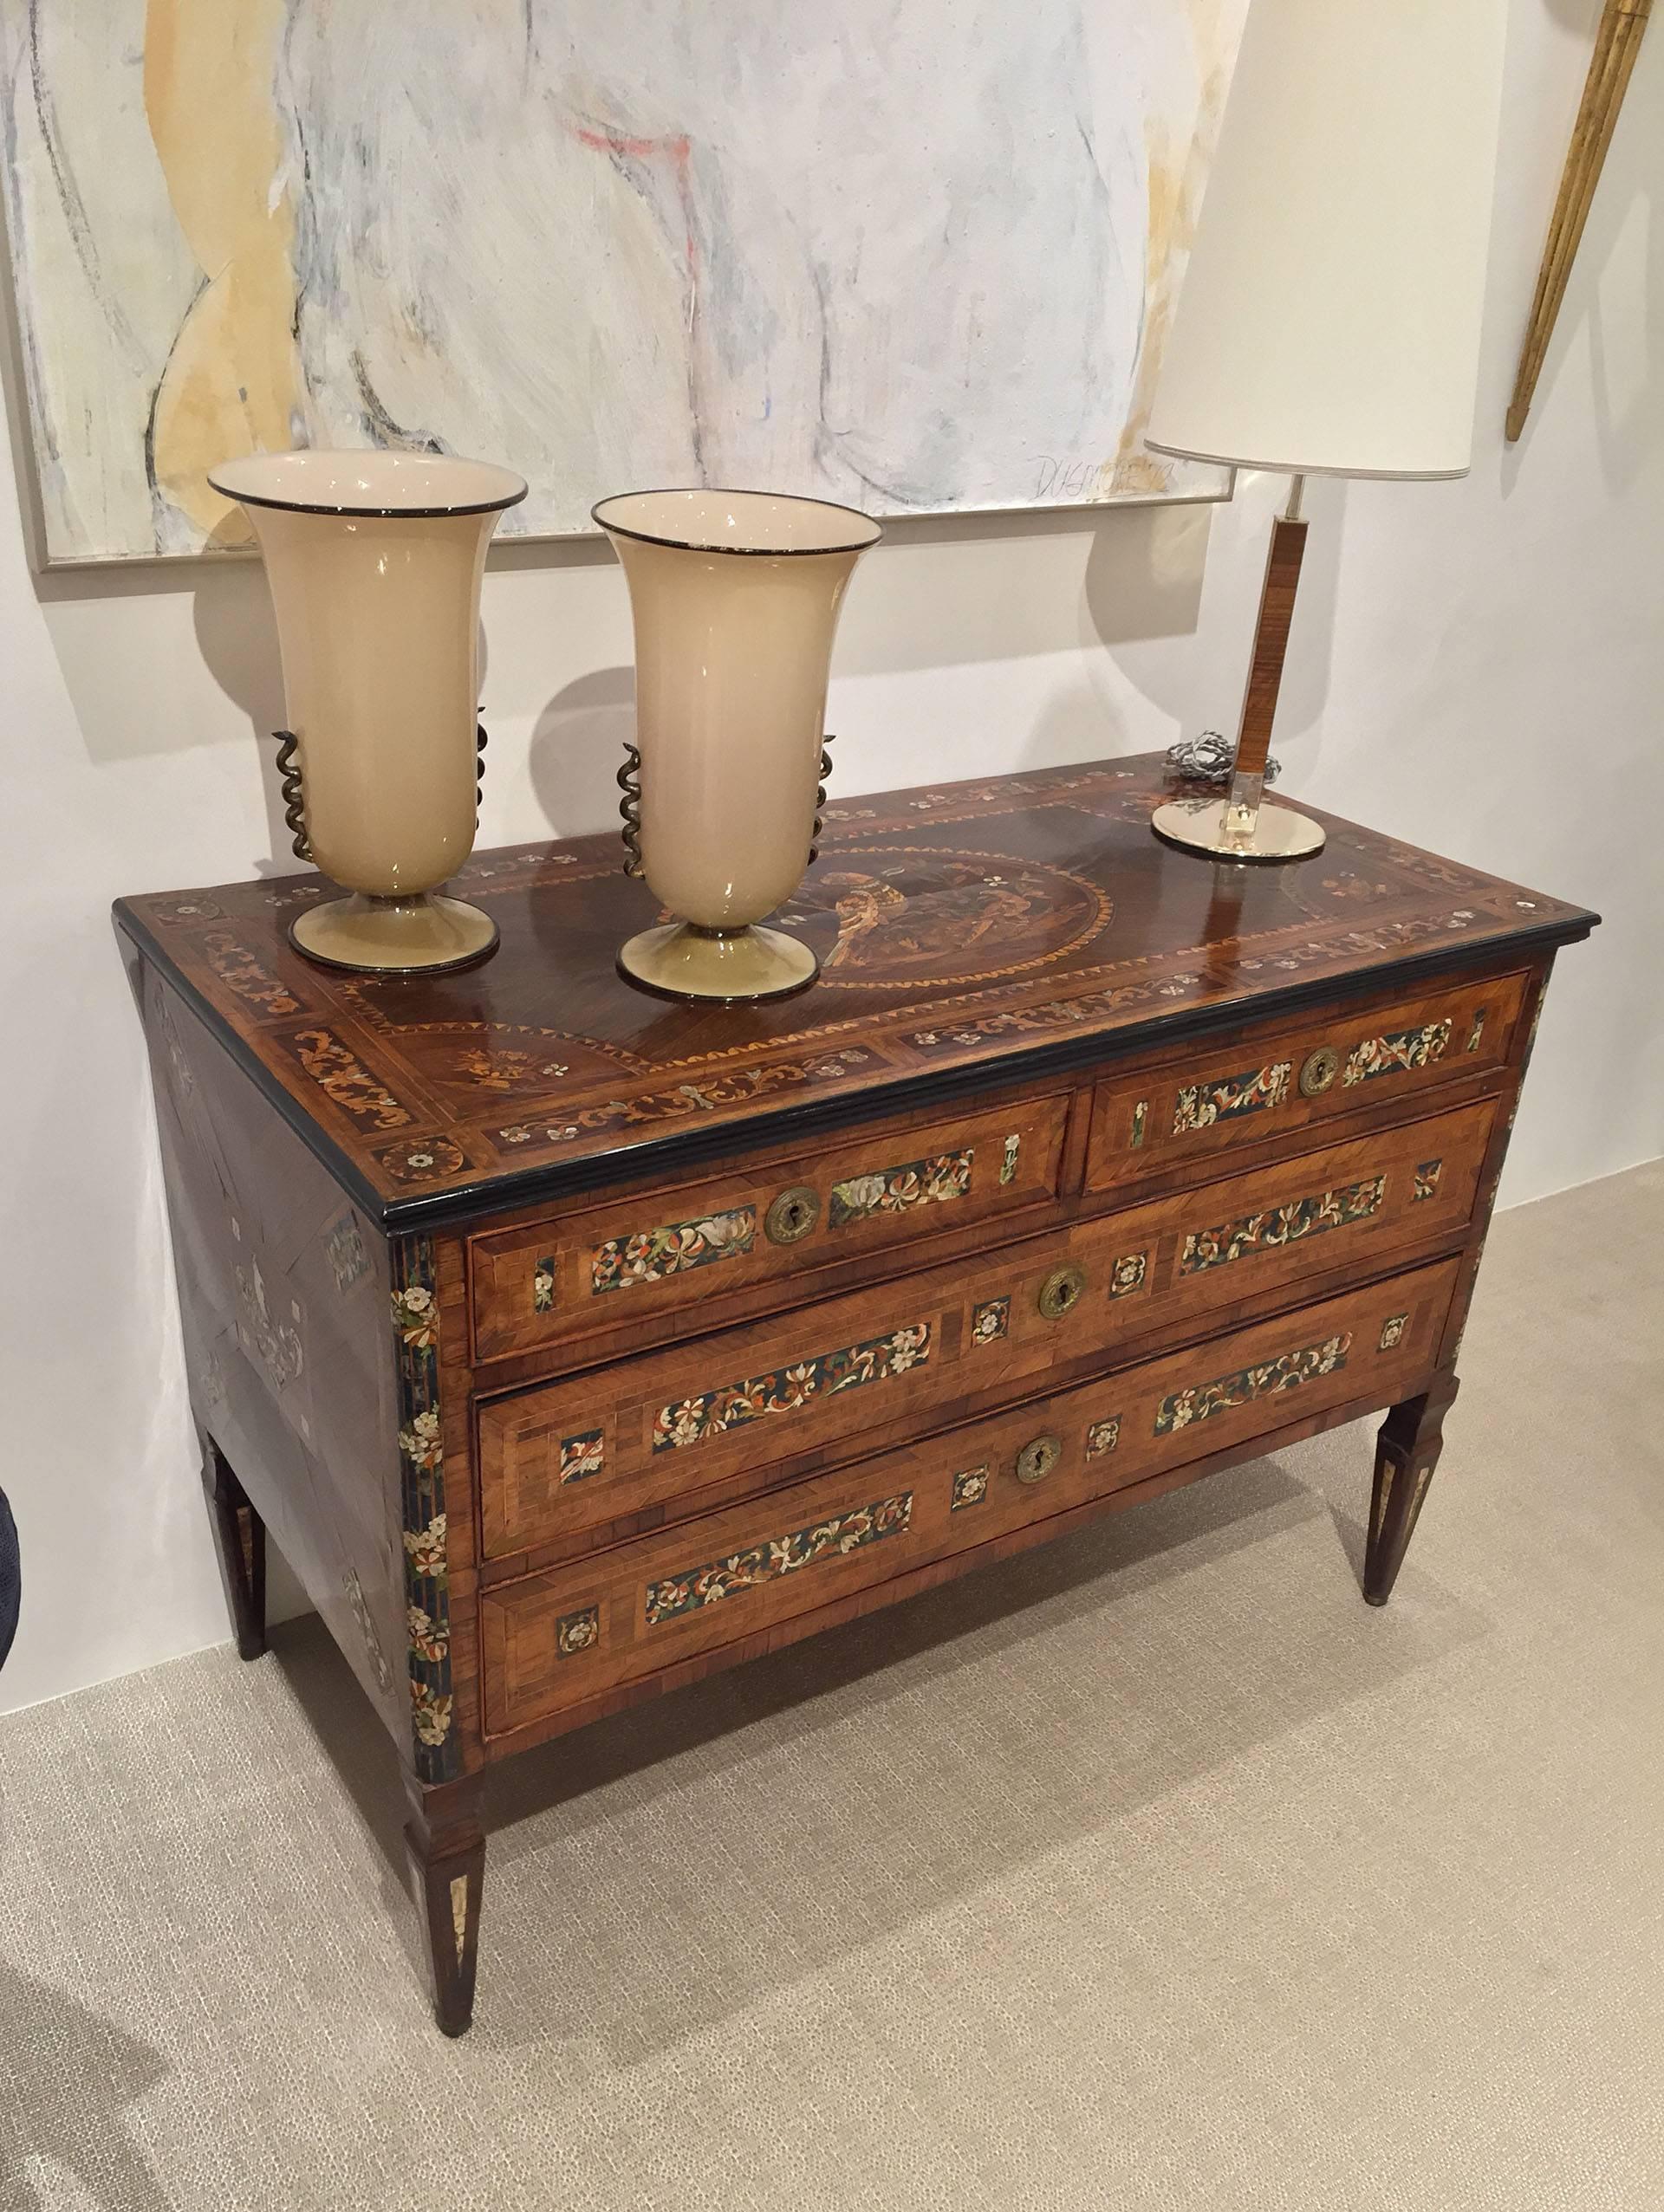 Northern Italian circa 1785 neoclassic marquetry commode having an intricately inlaid top with lacquer, fruitwoods and mother-of-pearl showing a central parrot, the front with two short drawers and two long similarly inlaid, as well as, the sides.
 